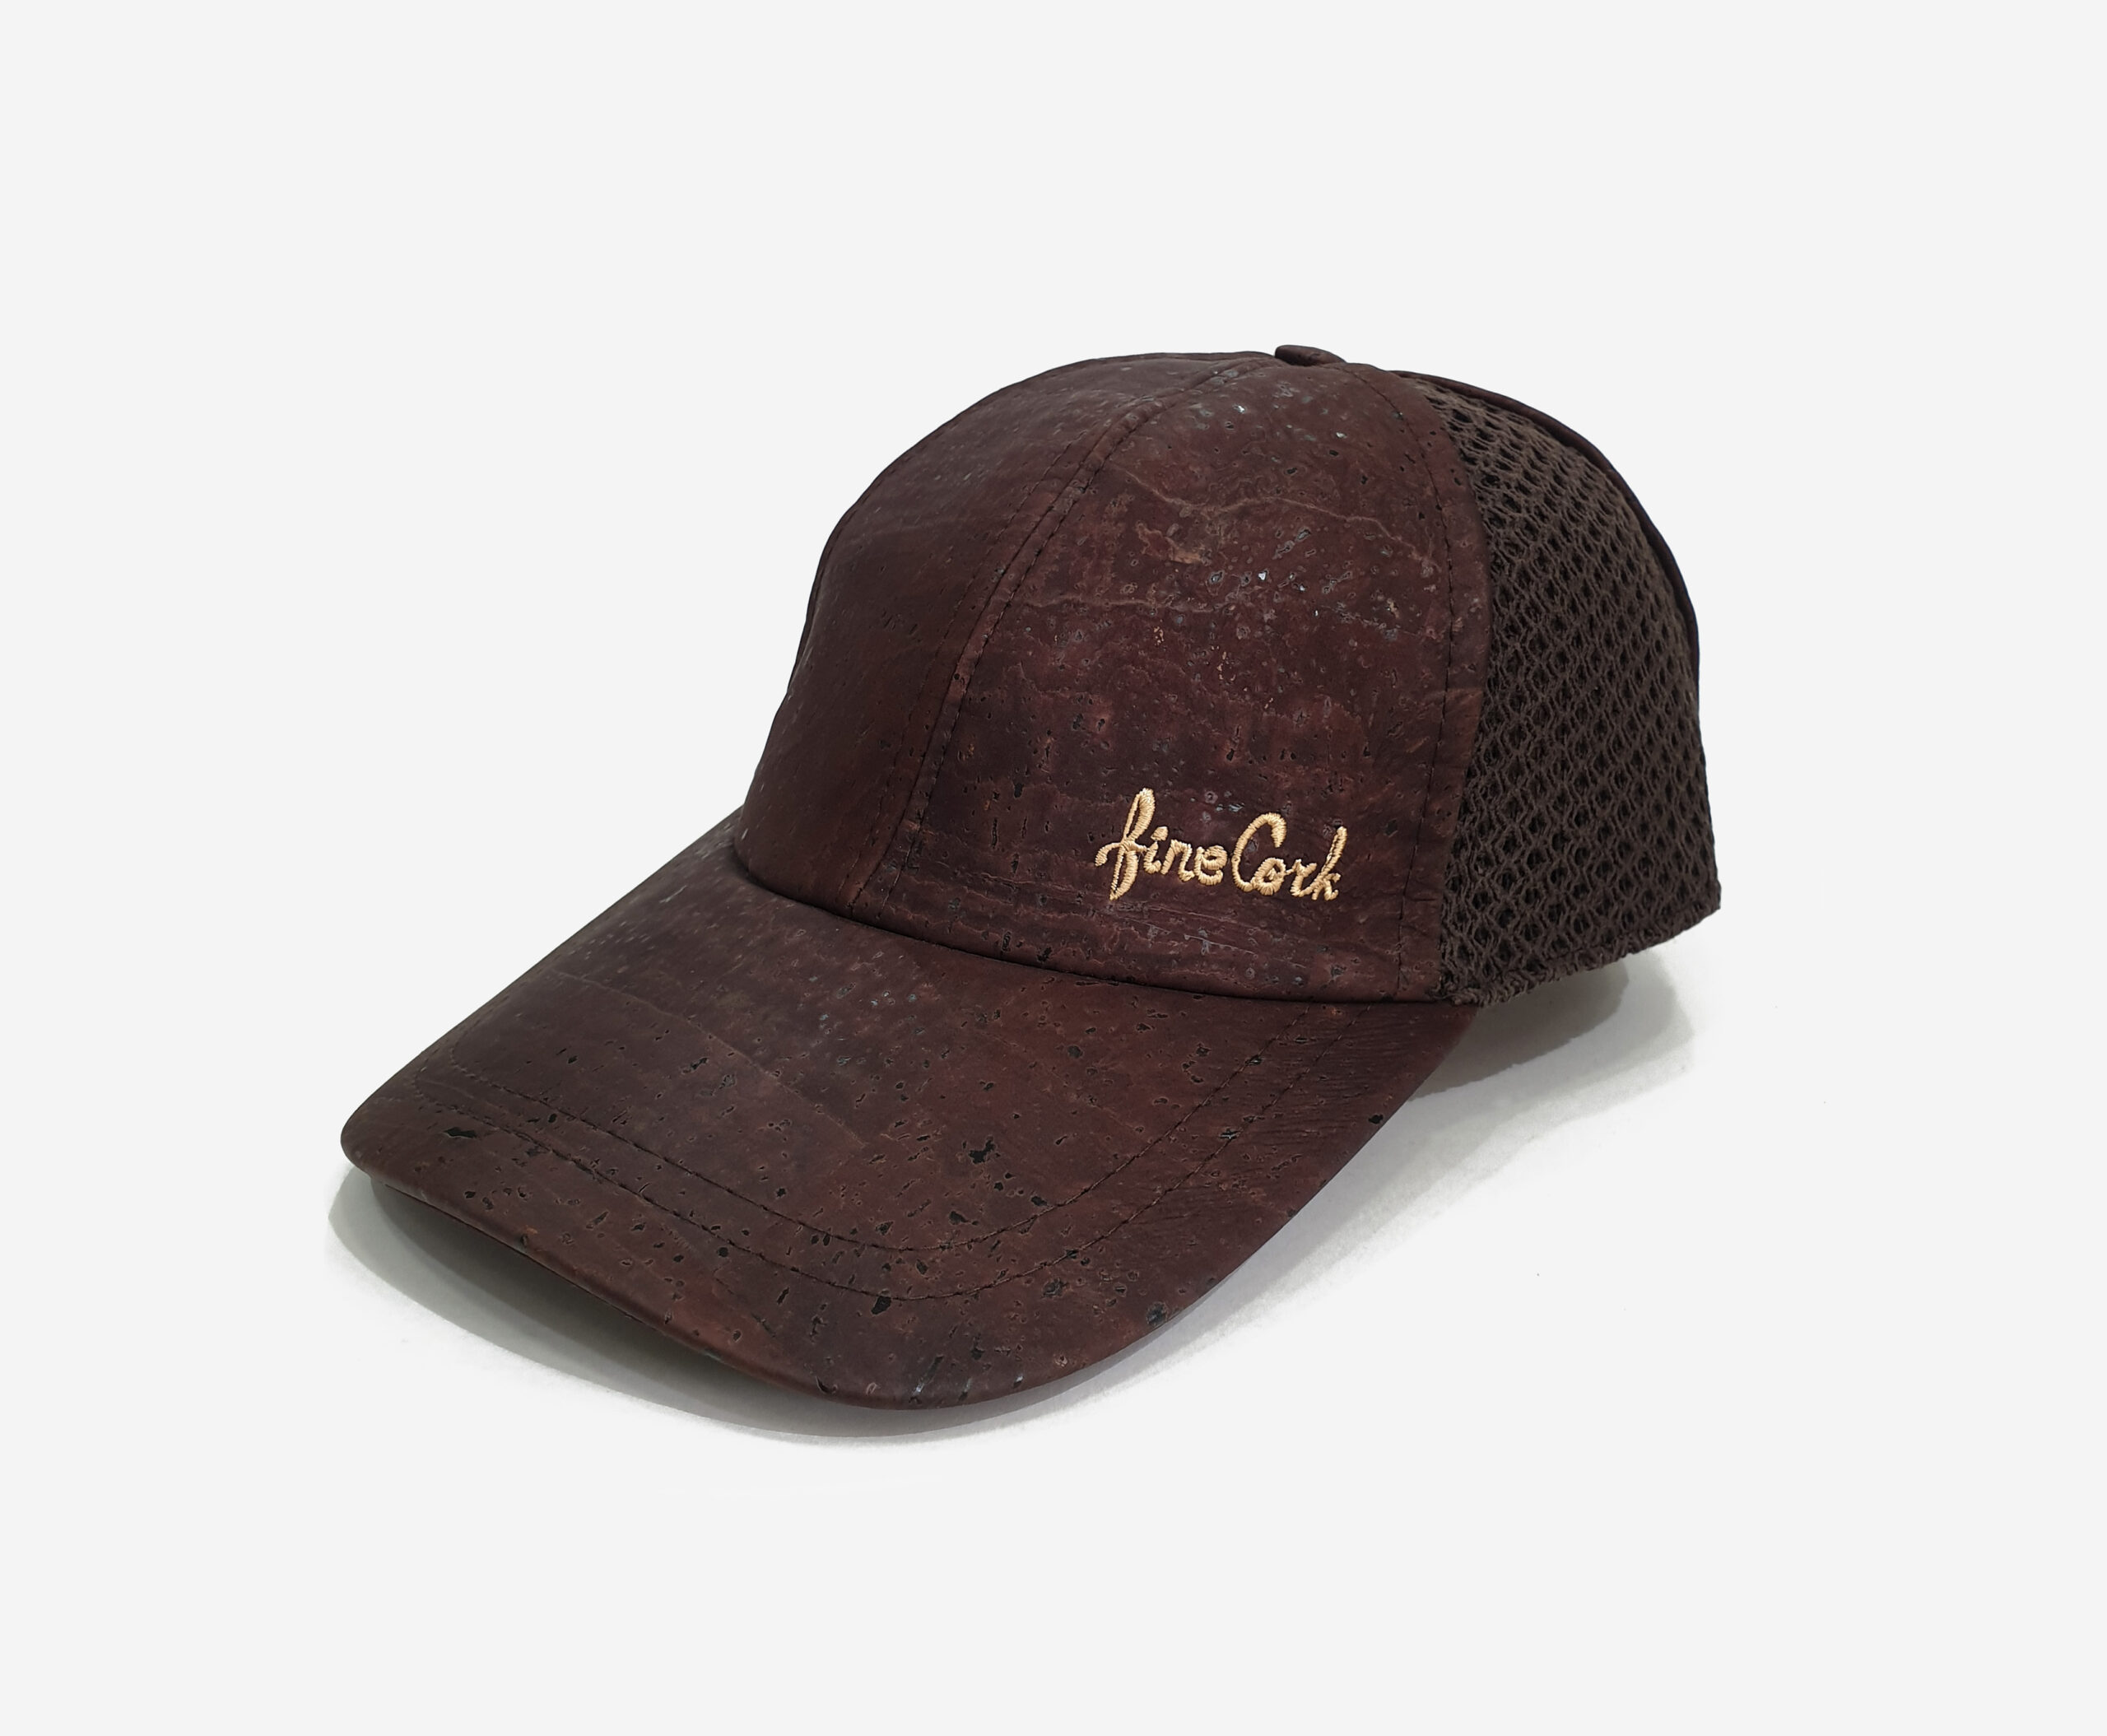 Basic Cap With Vent Holes 010